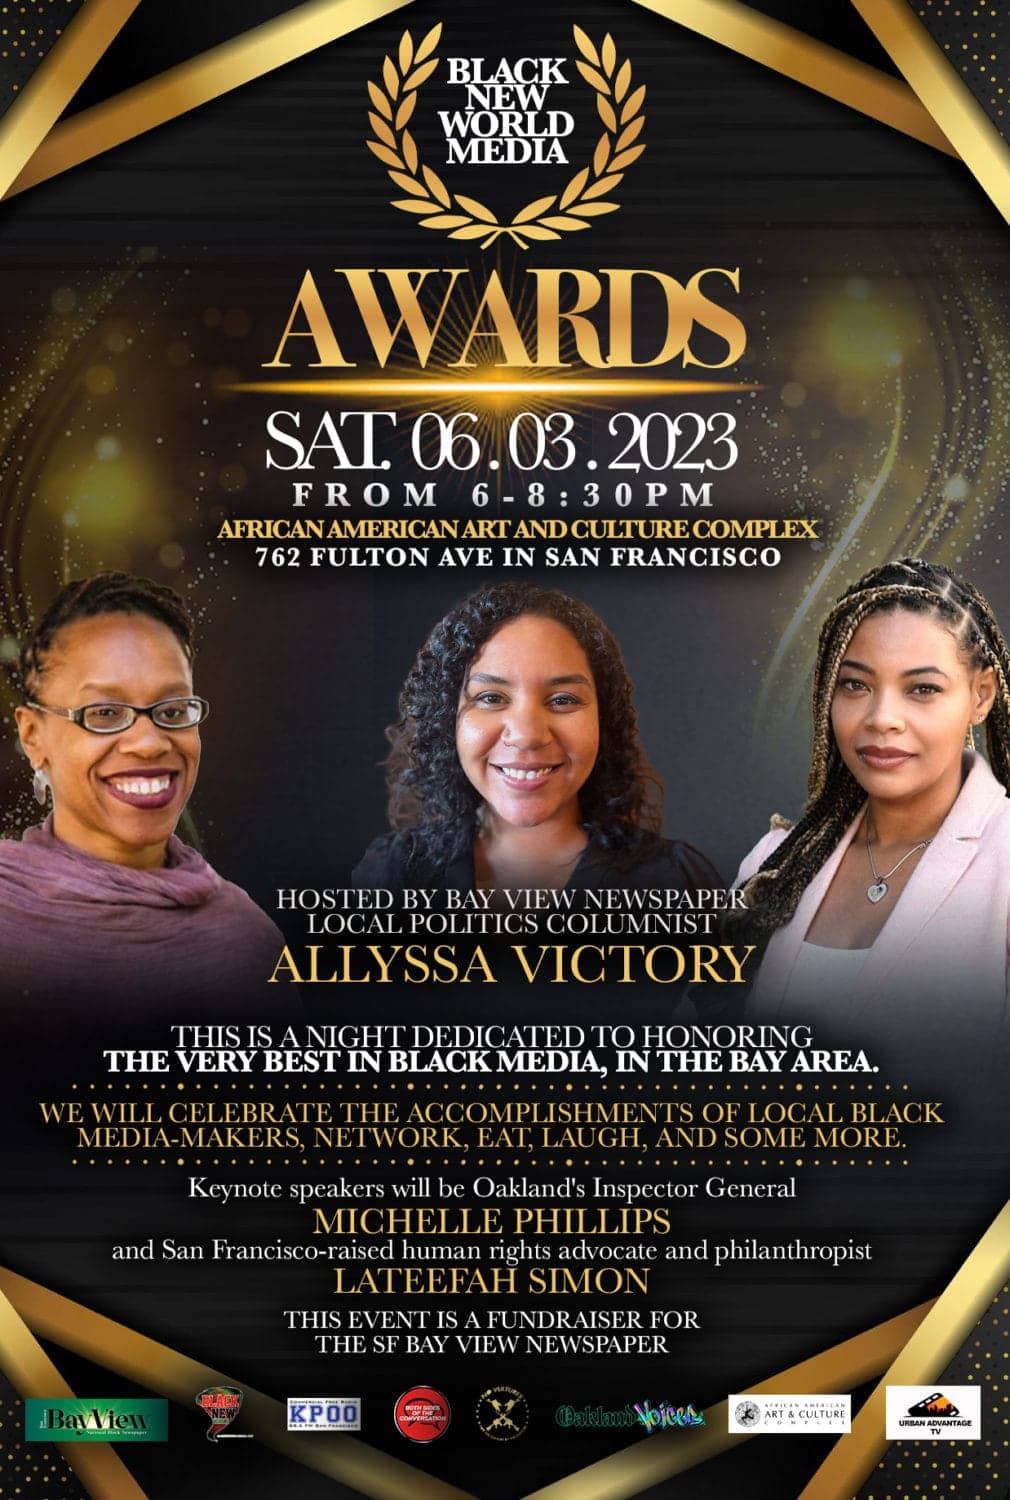 3-New-Awards-4-x-6-Revision-1, Black New World Media Awards night is coming June 3 at the African American Art and Culture Complex, Culture Currents Featured News & Views 